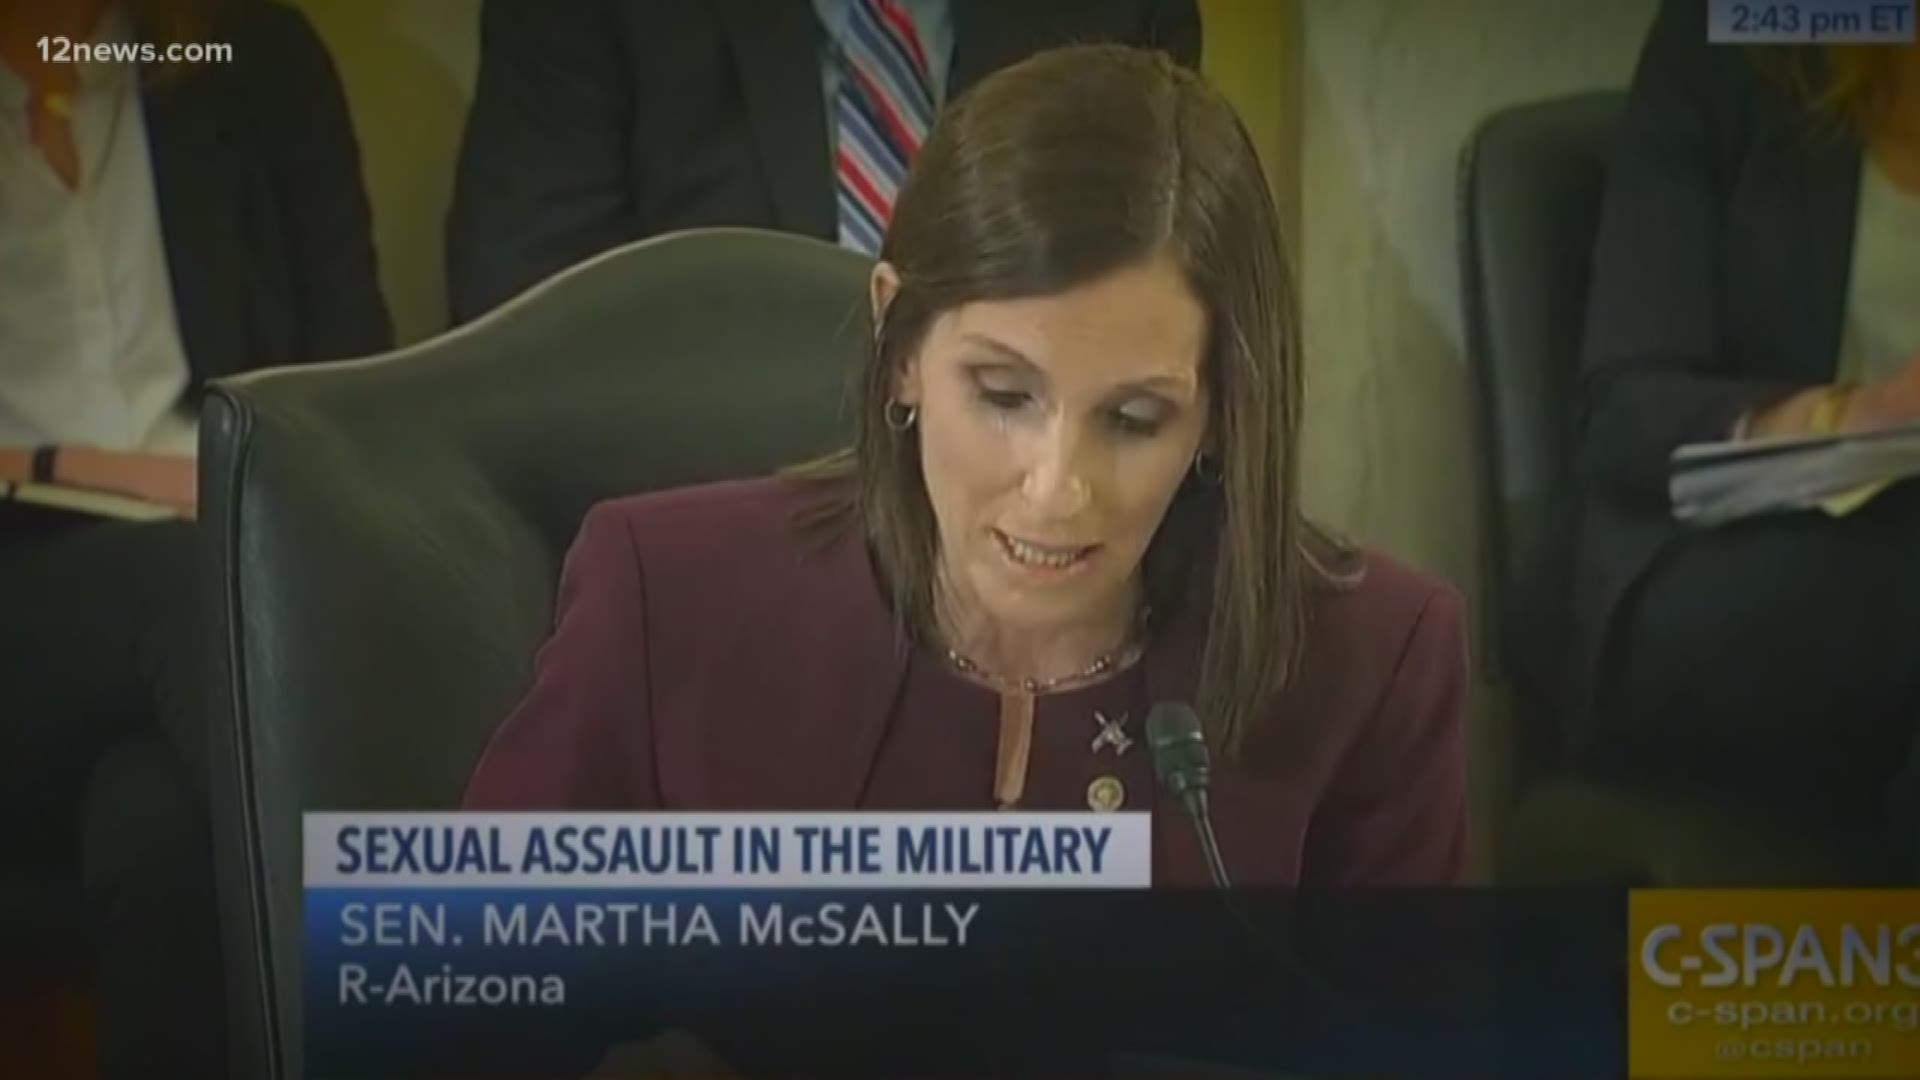 During a U.S. Senate hearing on stopping the scourge of sexual assault in the military, Sen. Martha McSally said a superior officer raped her while she served in the Air Force. Now she's calling for change in military culture.